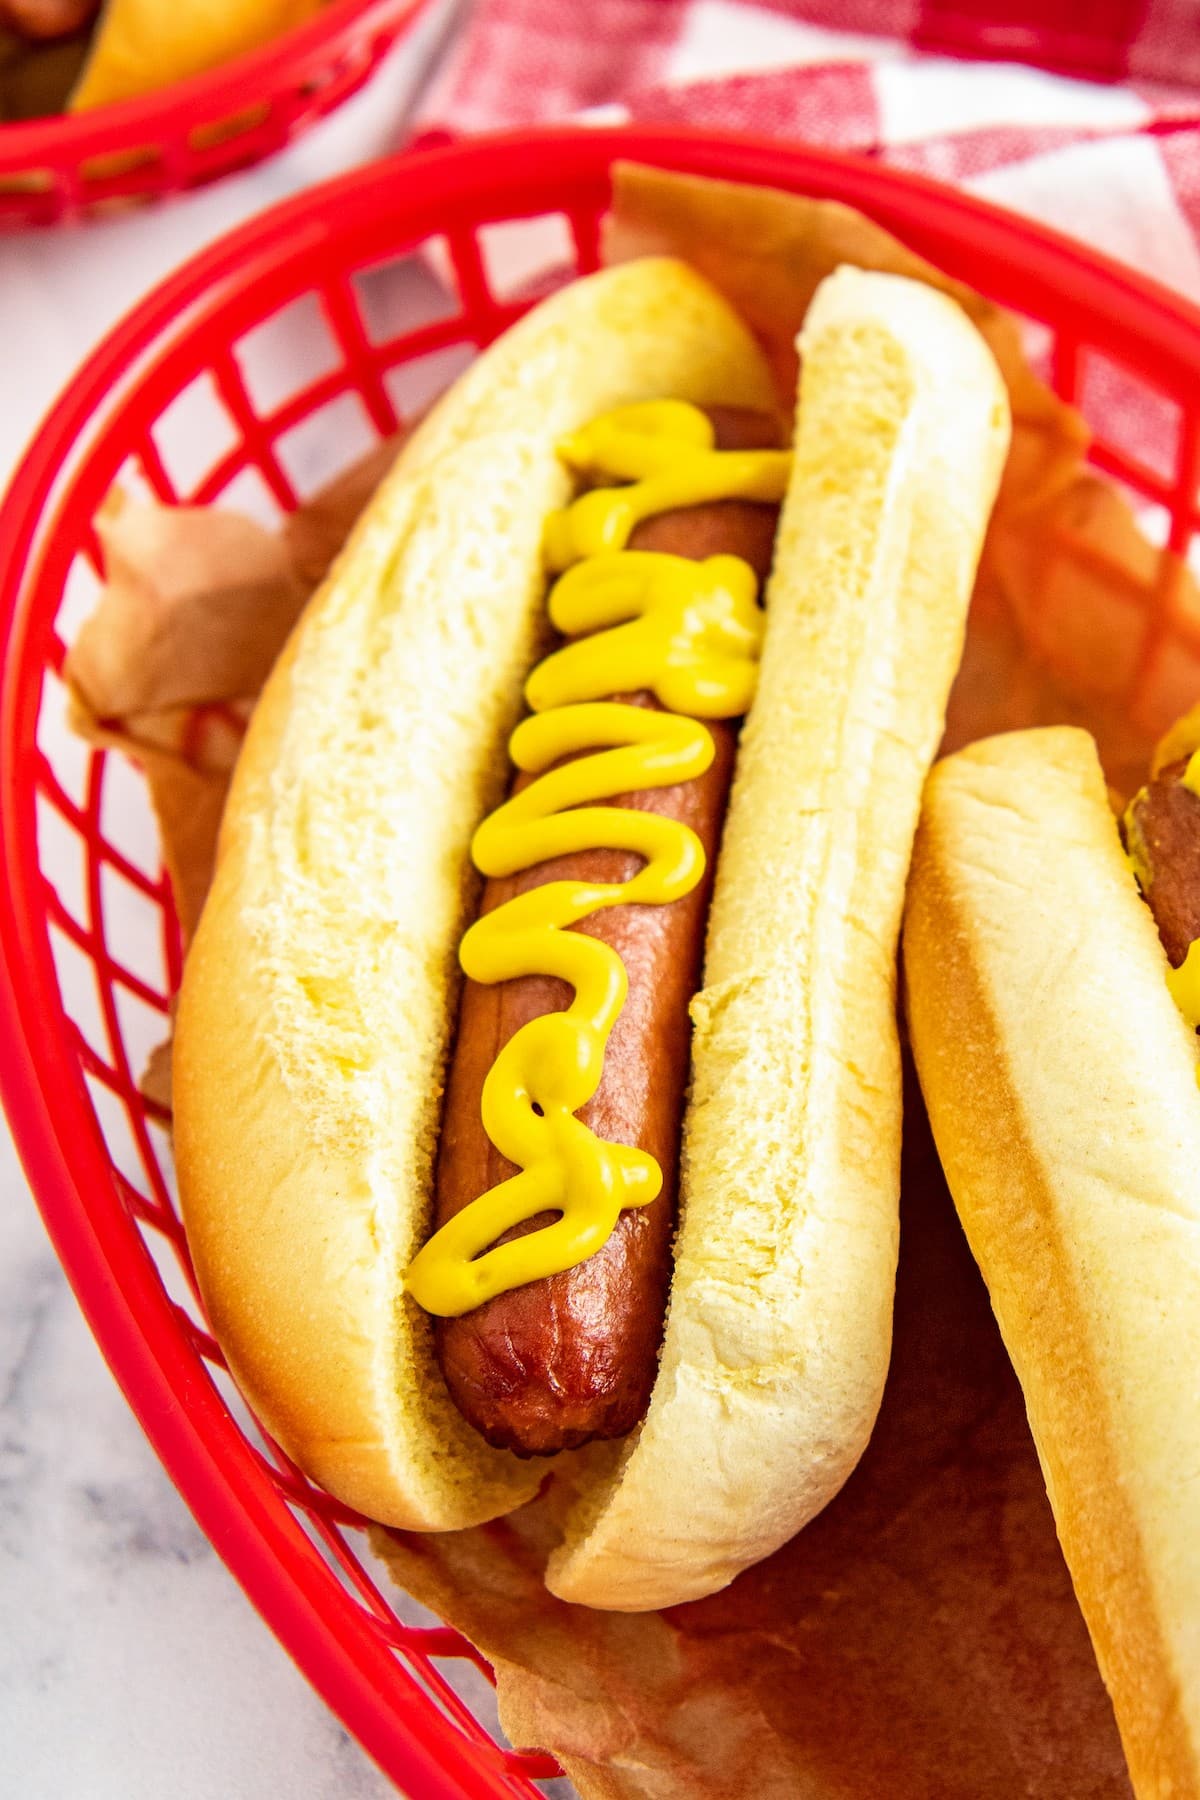 A hot dog in a bun with mustard on it.